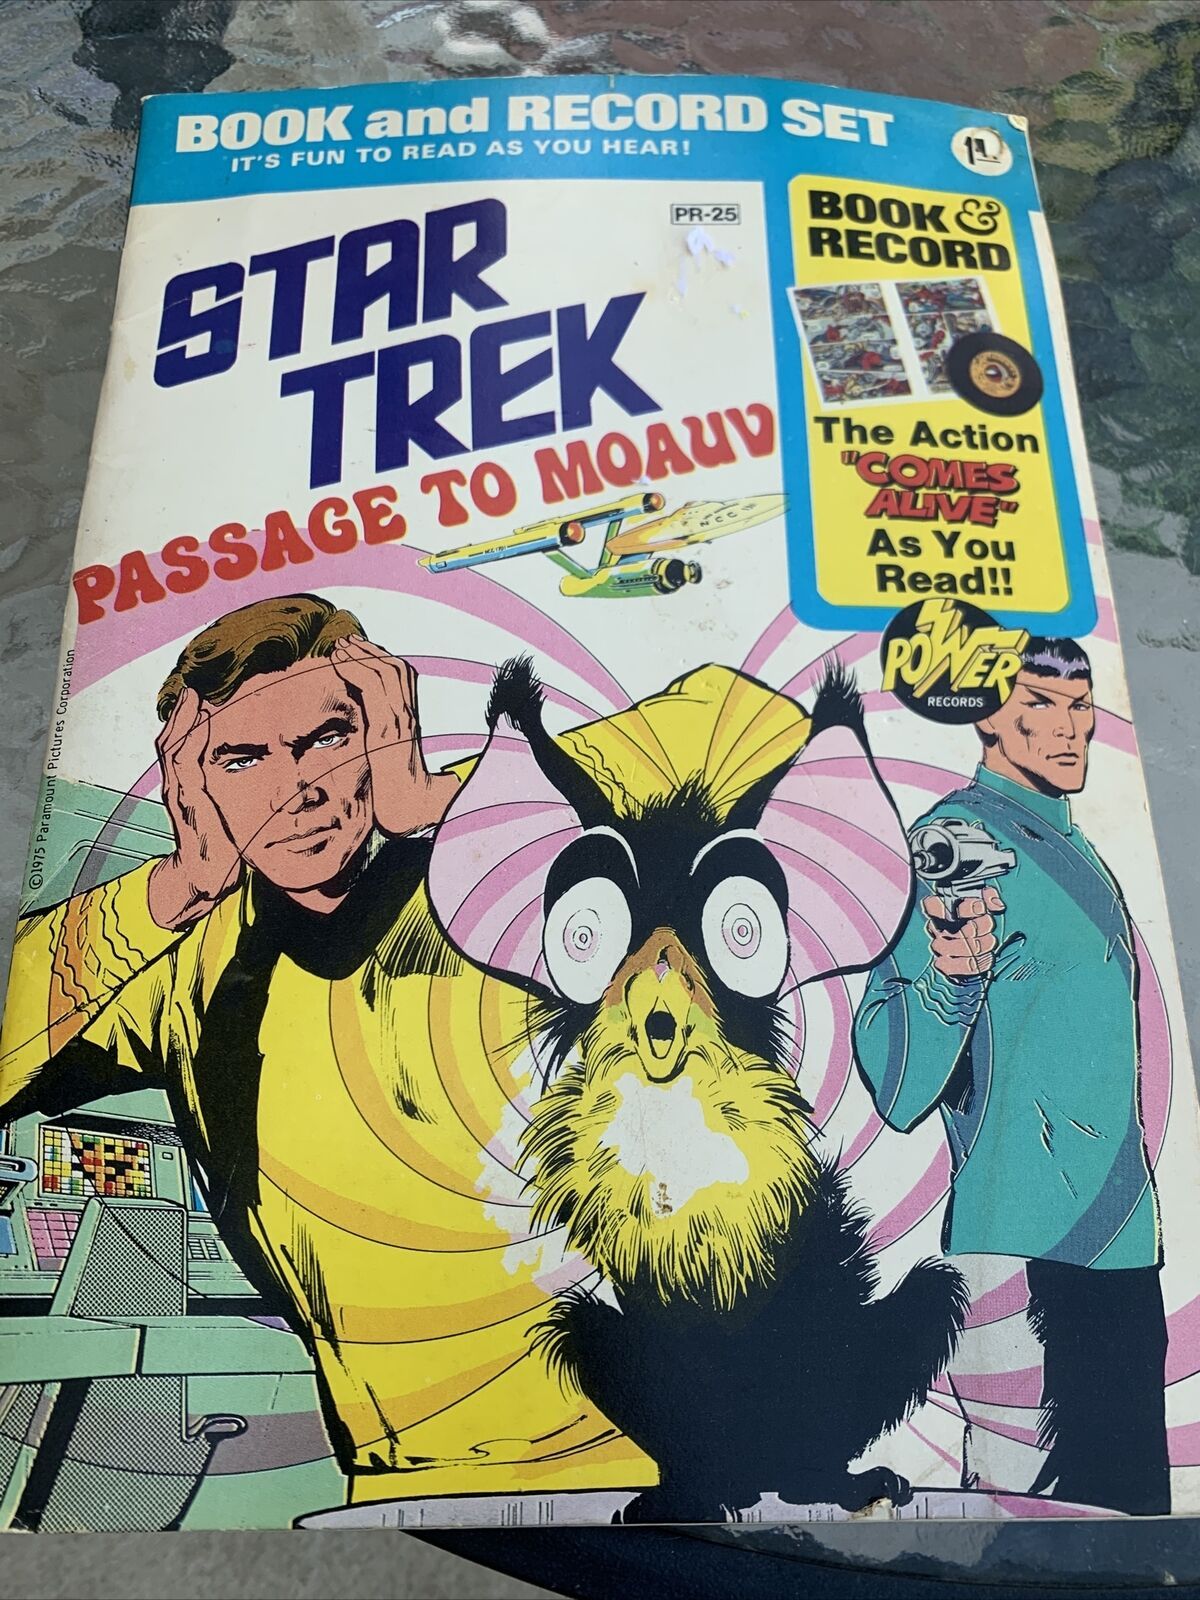 Primary image for 1975 Star Trek Book and Record Set Passage to Moauv